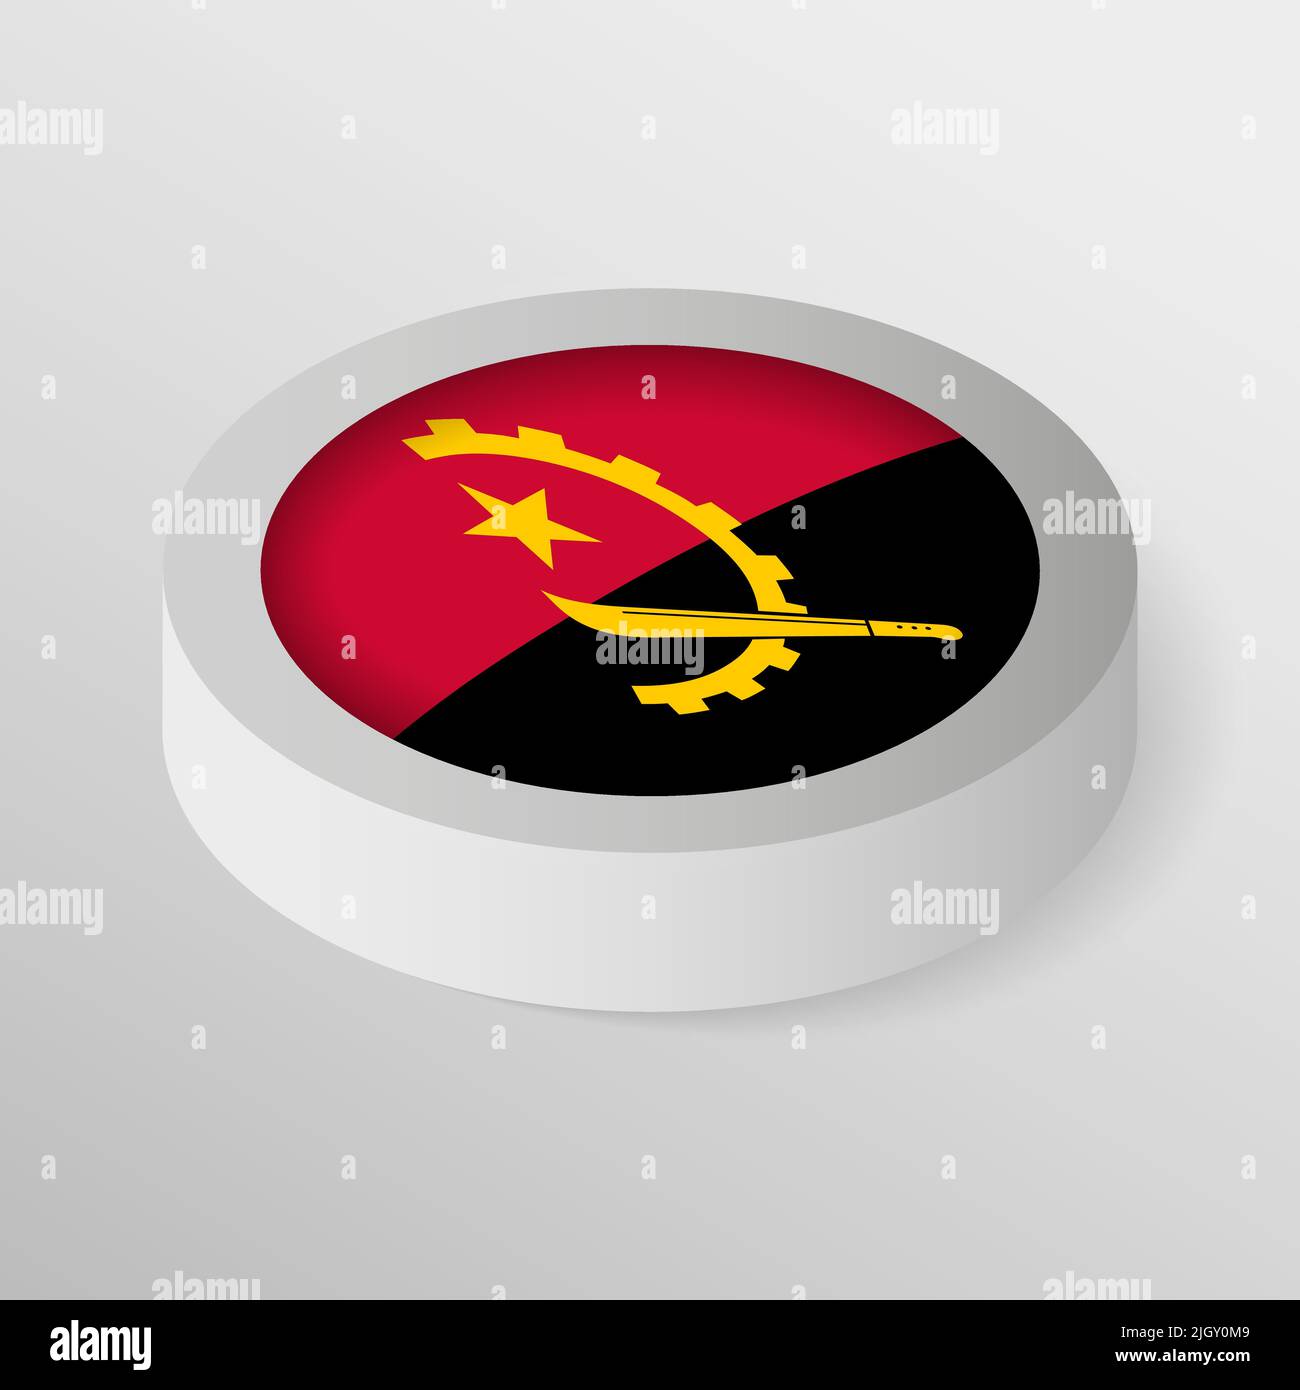 EPS10 Vector Patriotic shield with flag of Angola. An element of impact for the use you want to make of it. Stock Vector